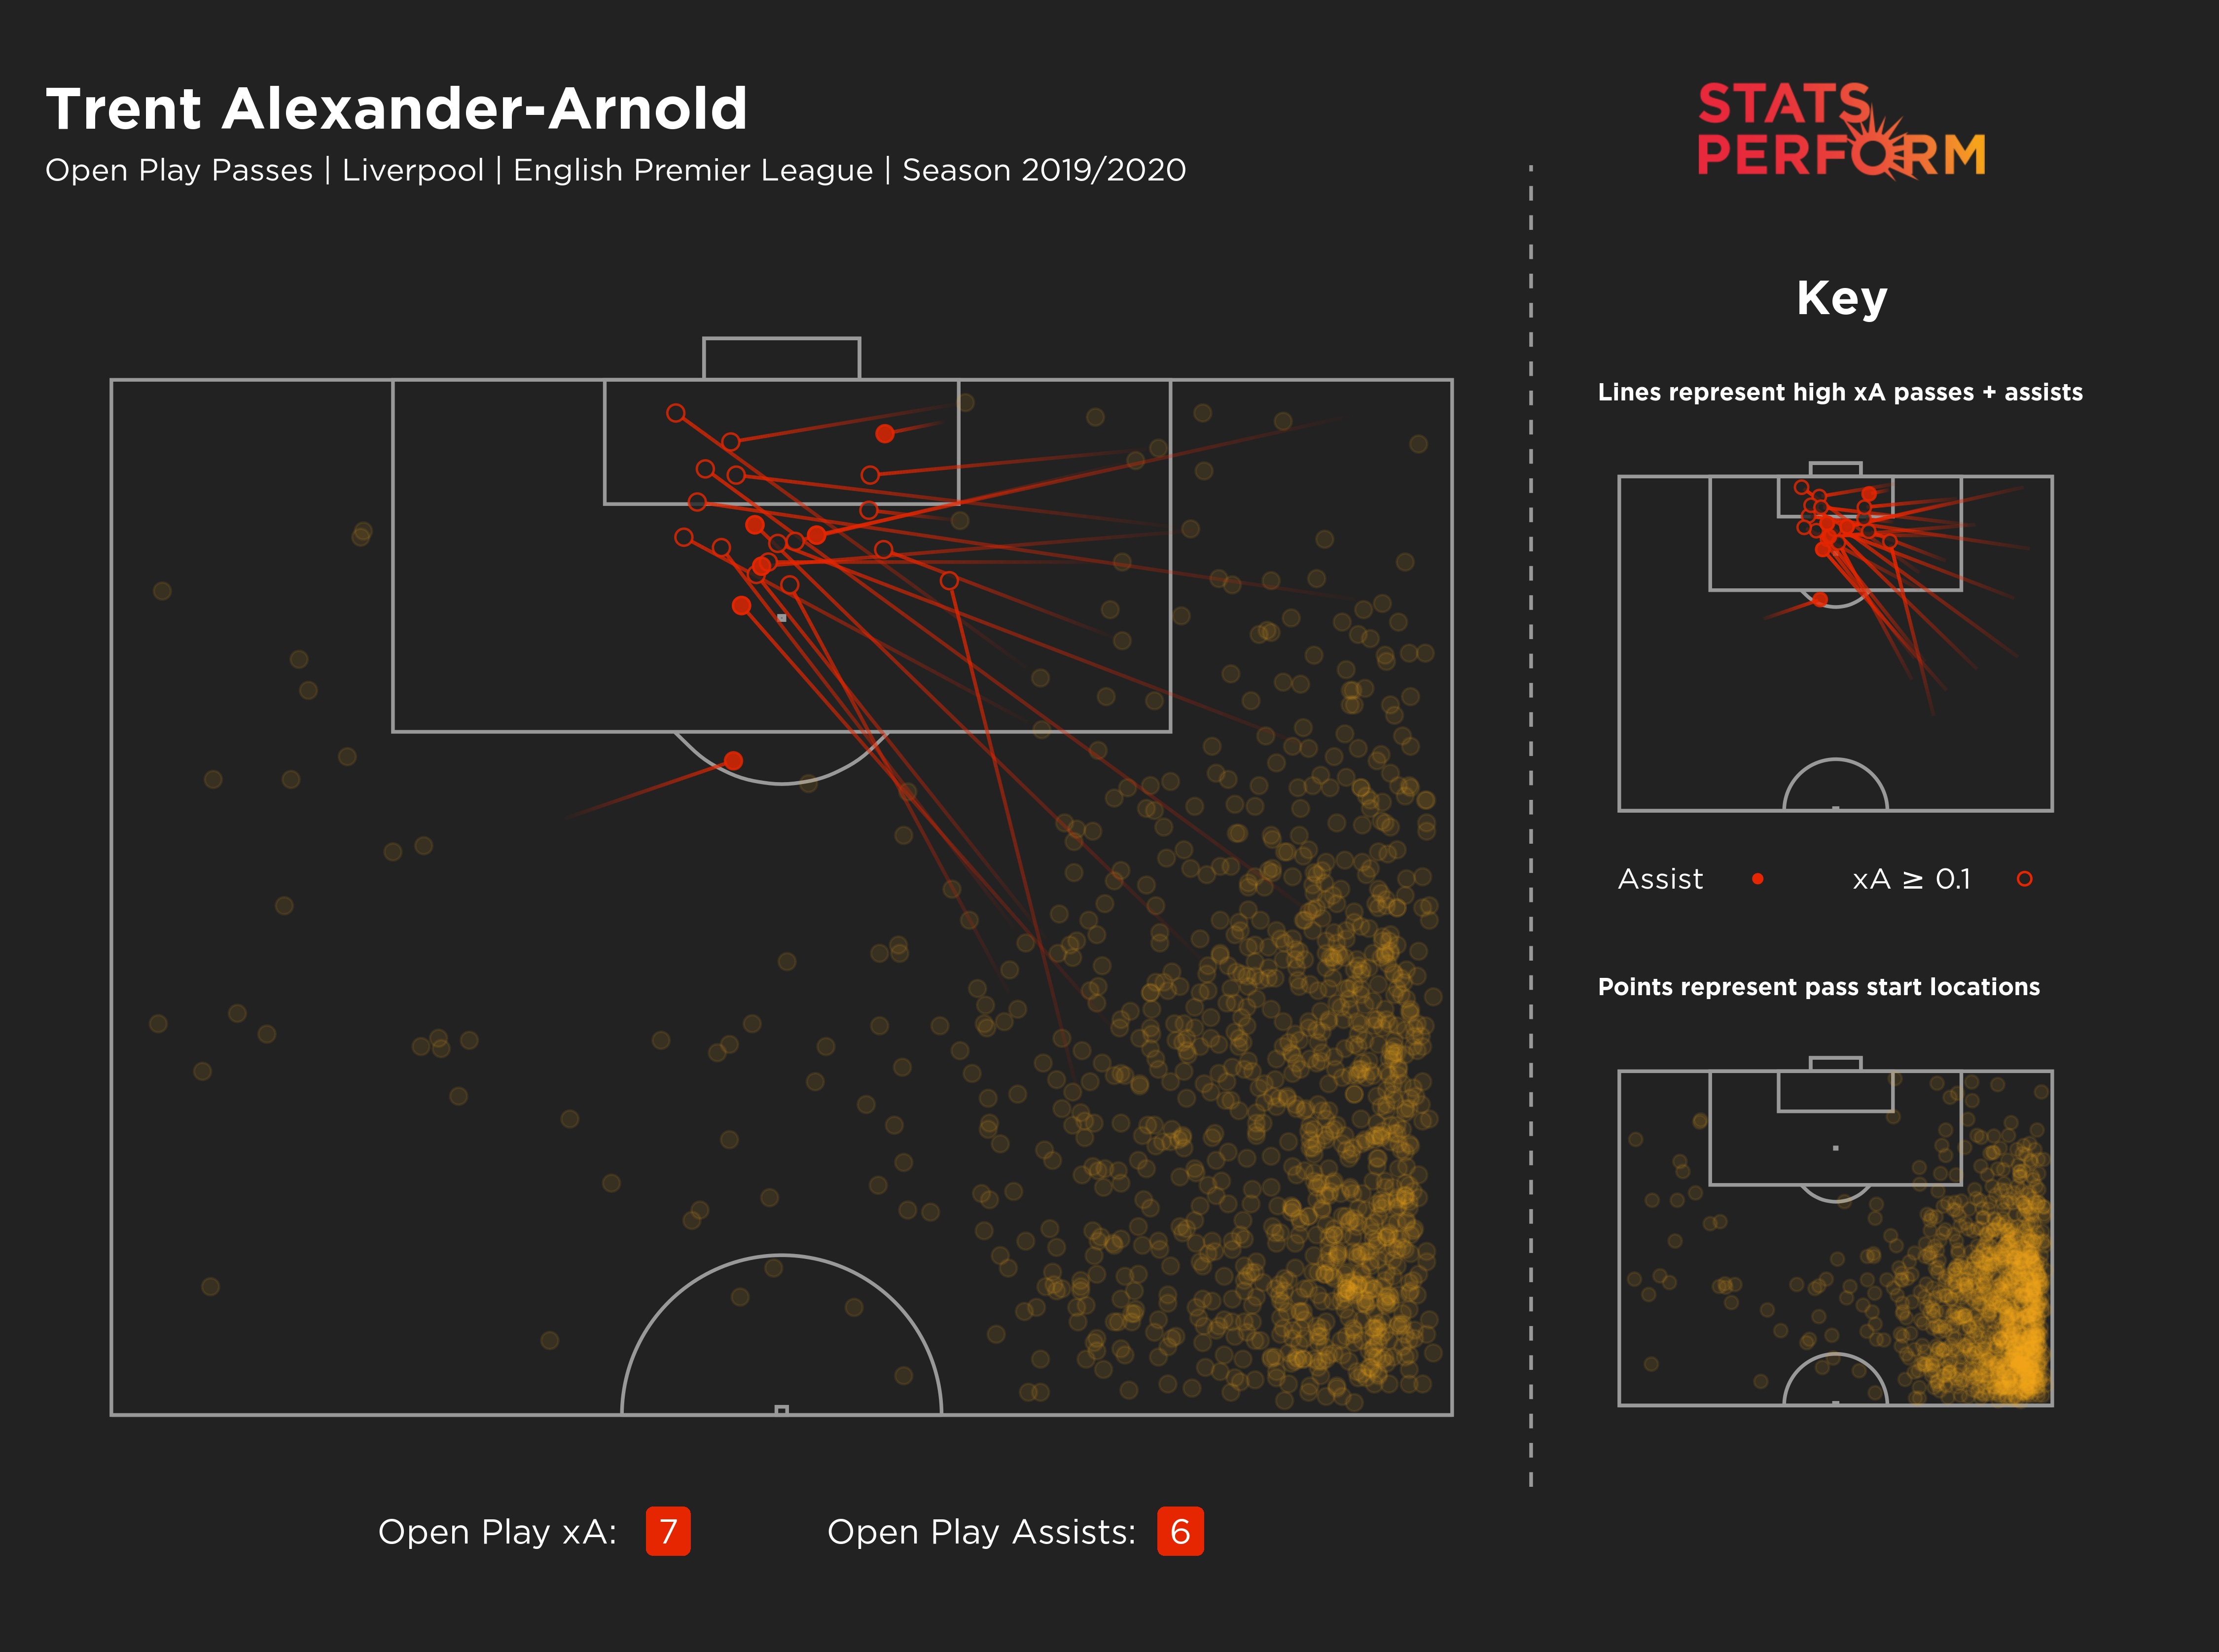 Trent Alexander-Arnold's 'open play passes' map for the 2019-20 season